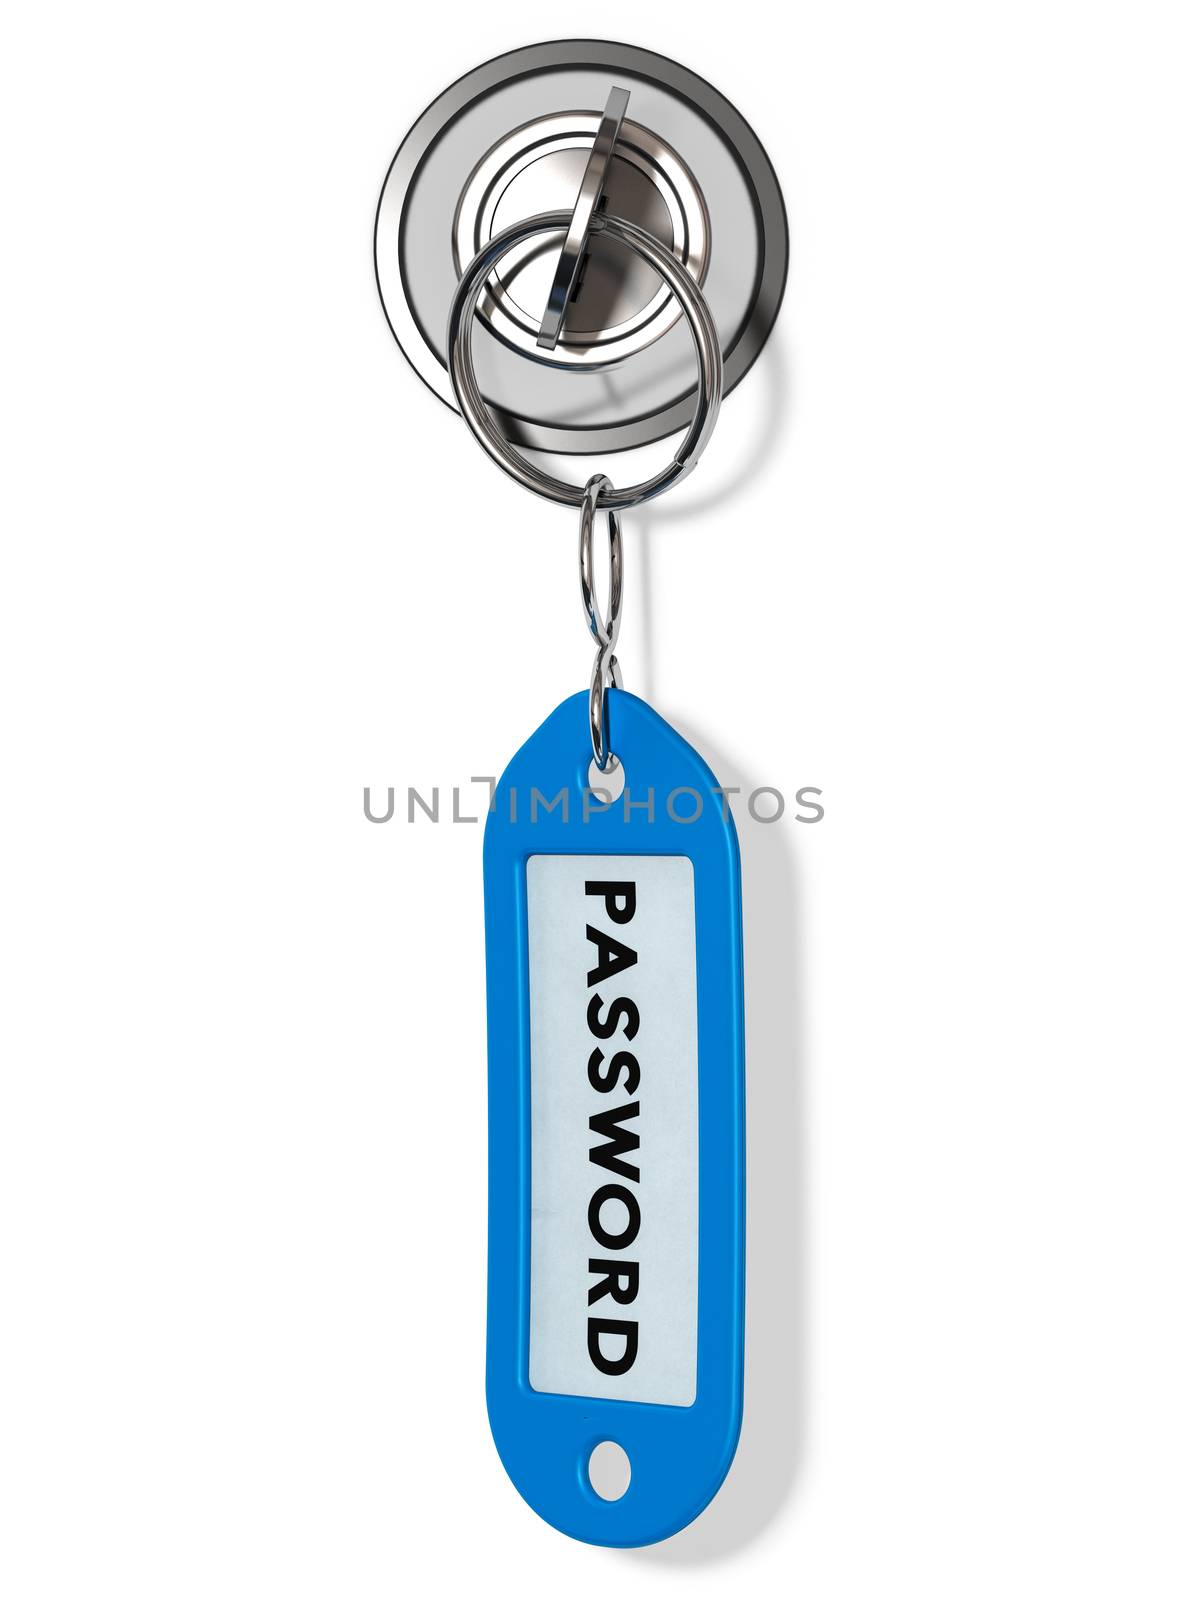 Key with blue keyring where it is written the word password, concept image suitable for online security.